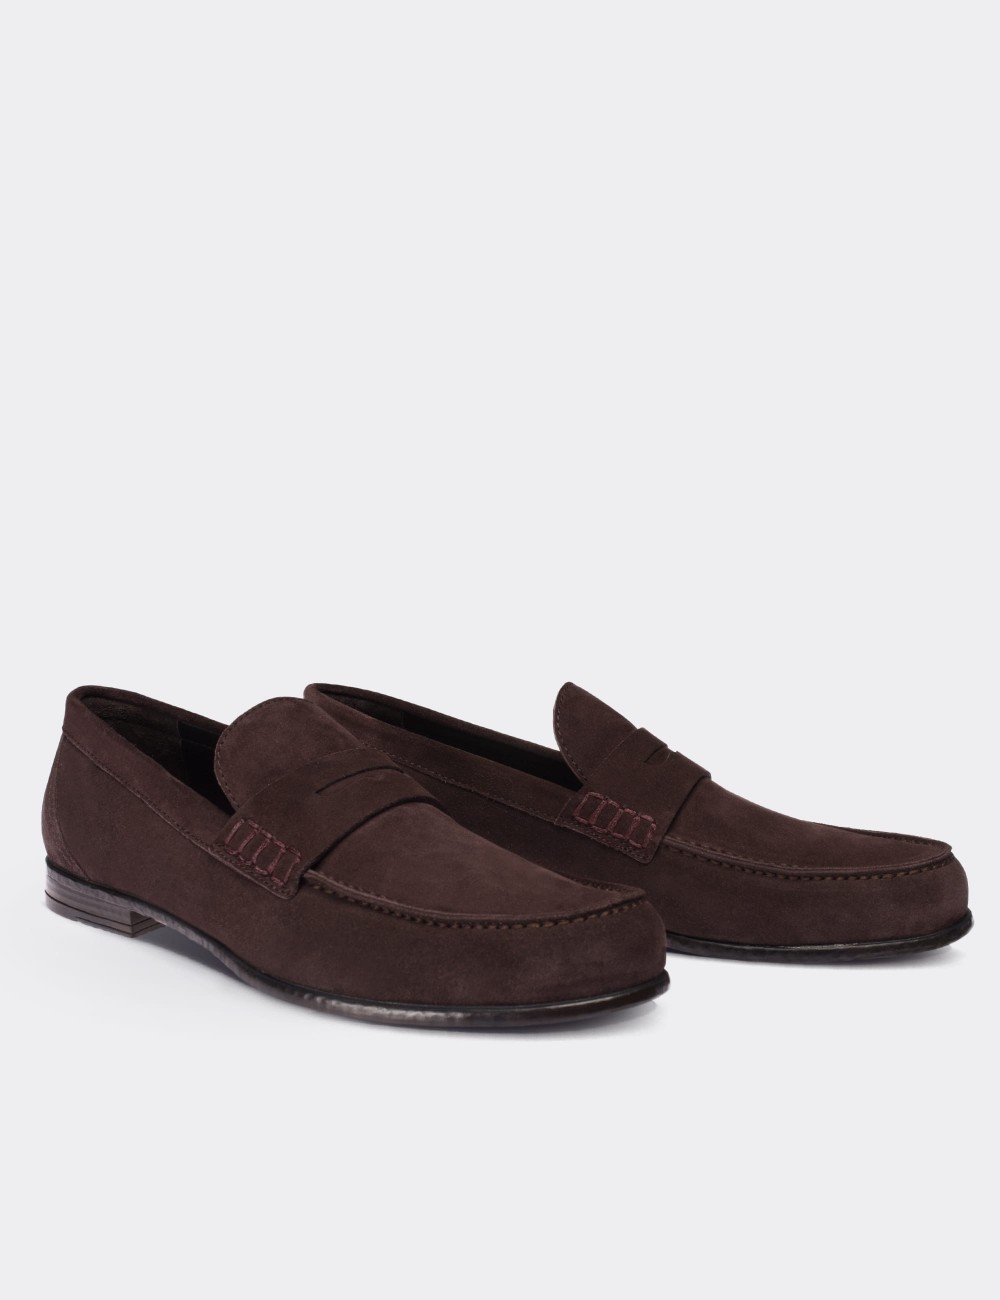 Brown Suede Leather Loafers - 01538MKHVC01